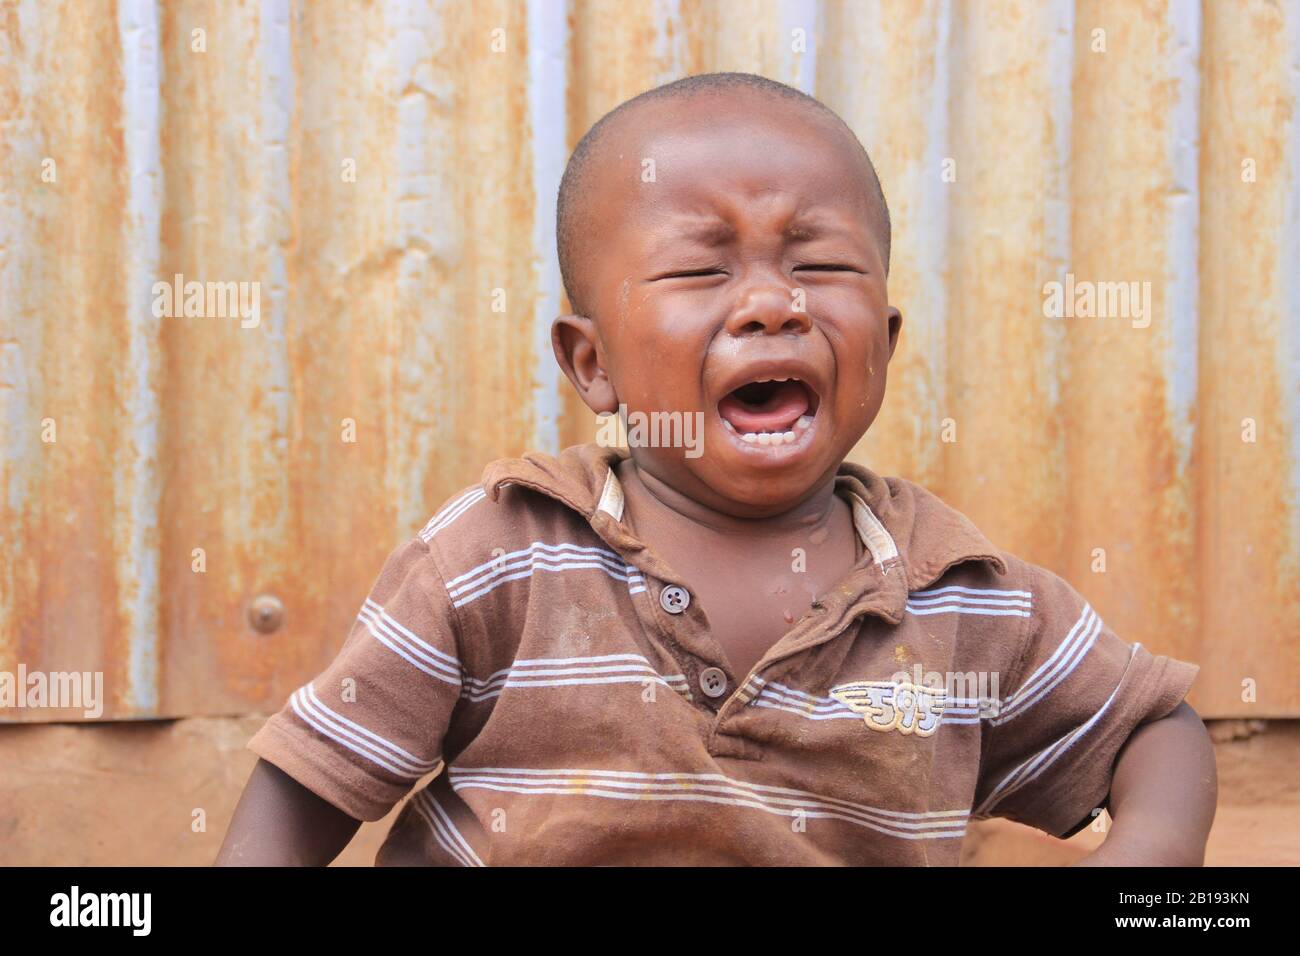 Kibera, Nairobi, Kenya - February 13, 2015: A little dirty poor African child crying out loud Stock Photo